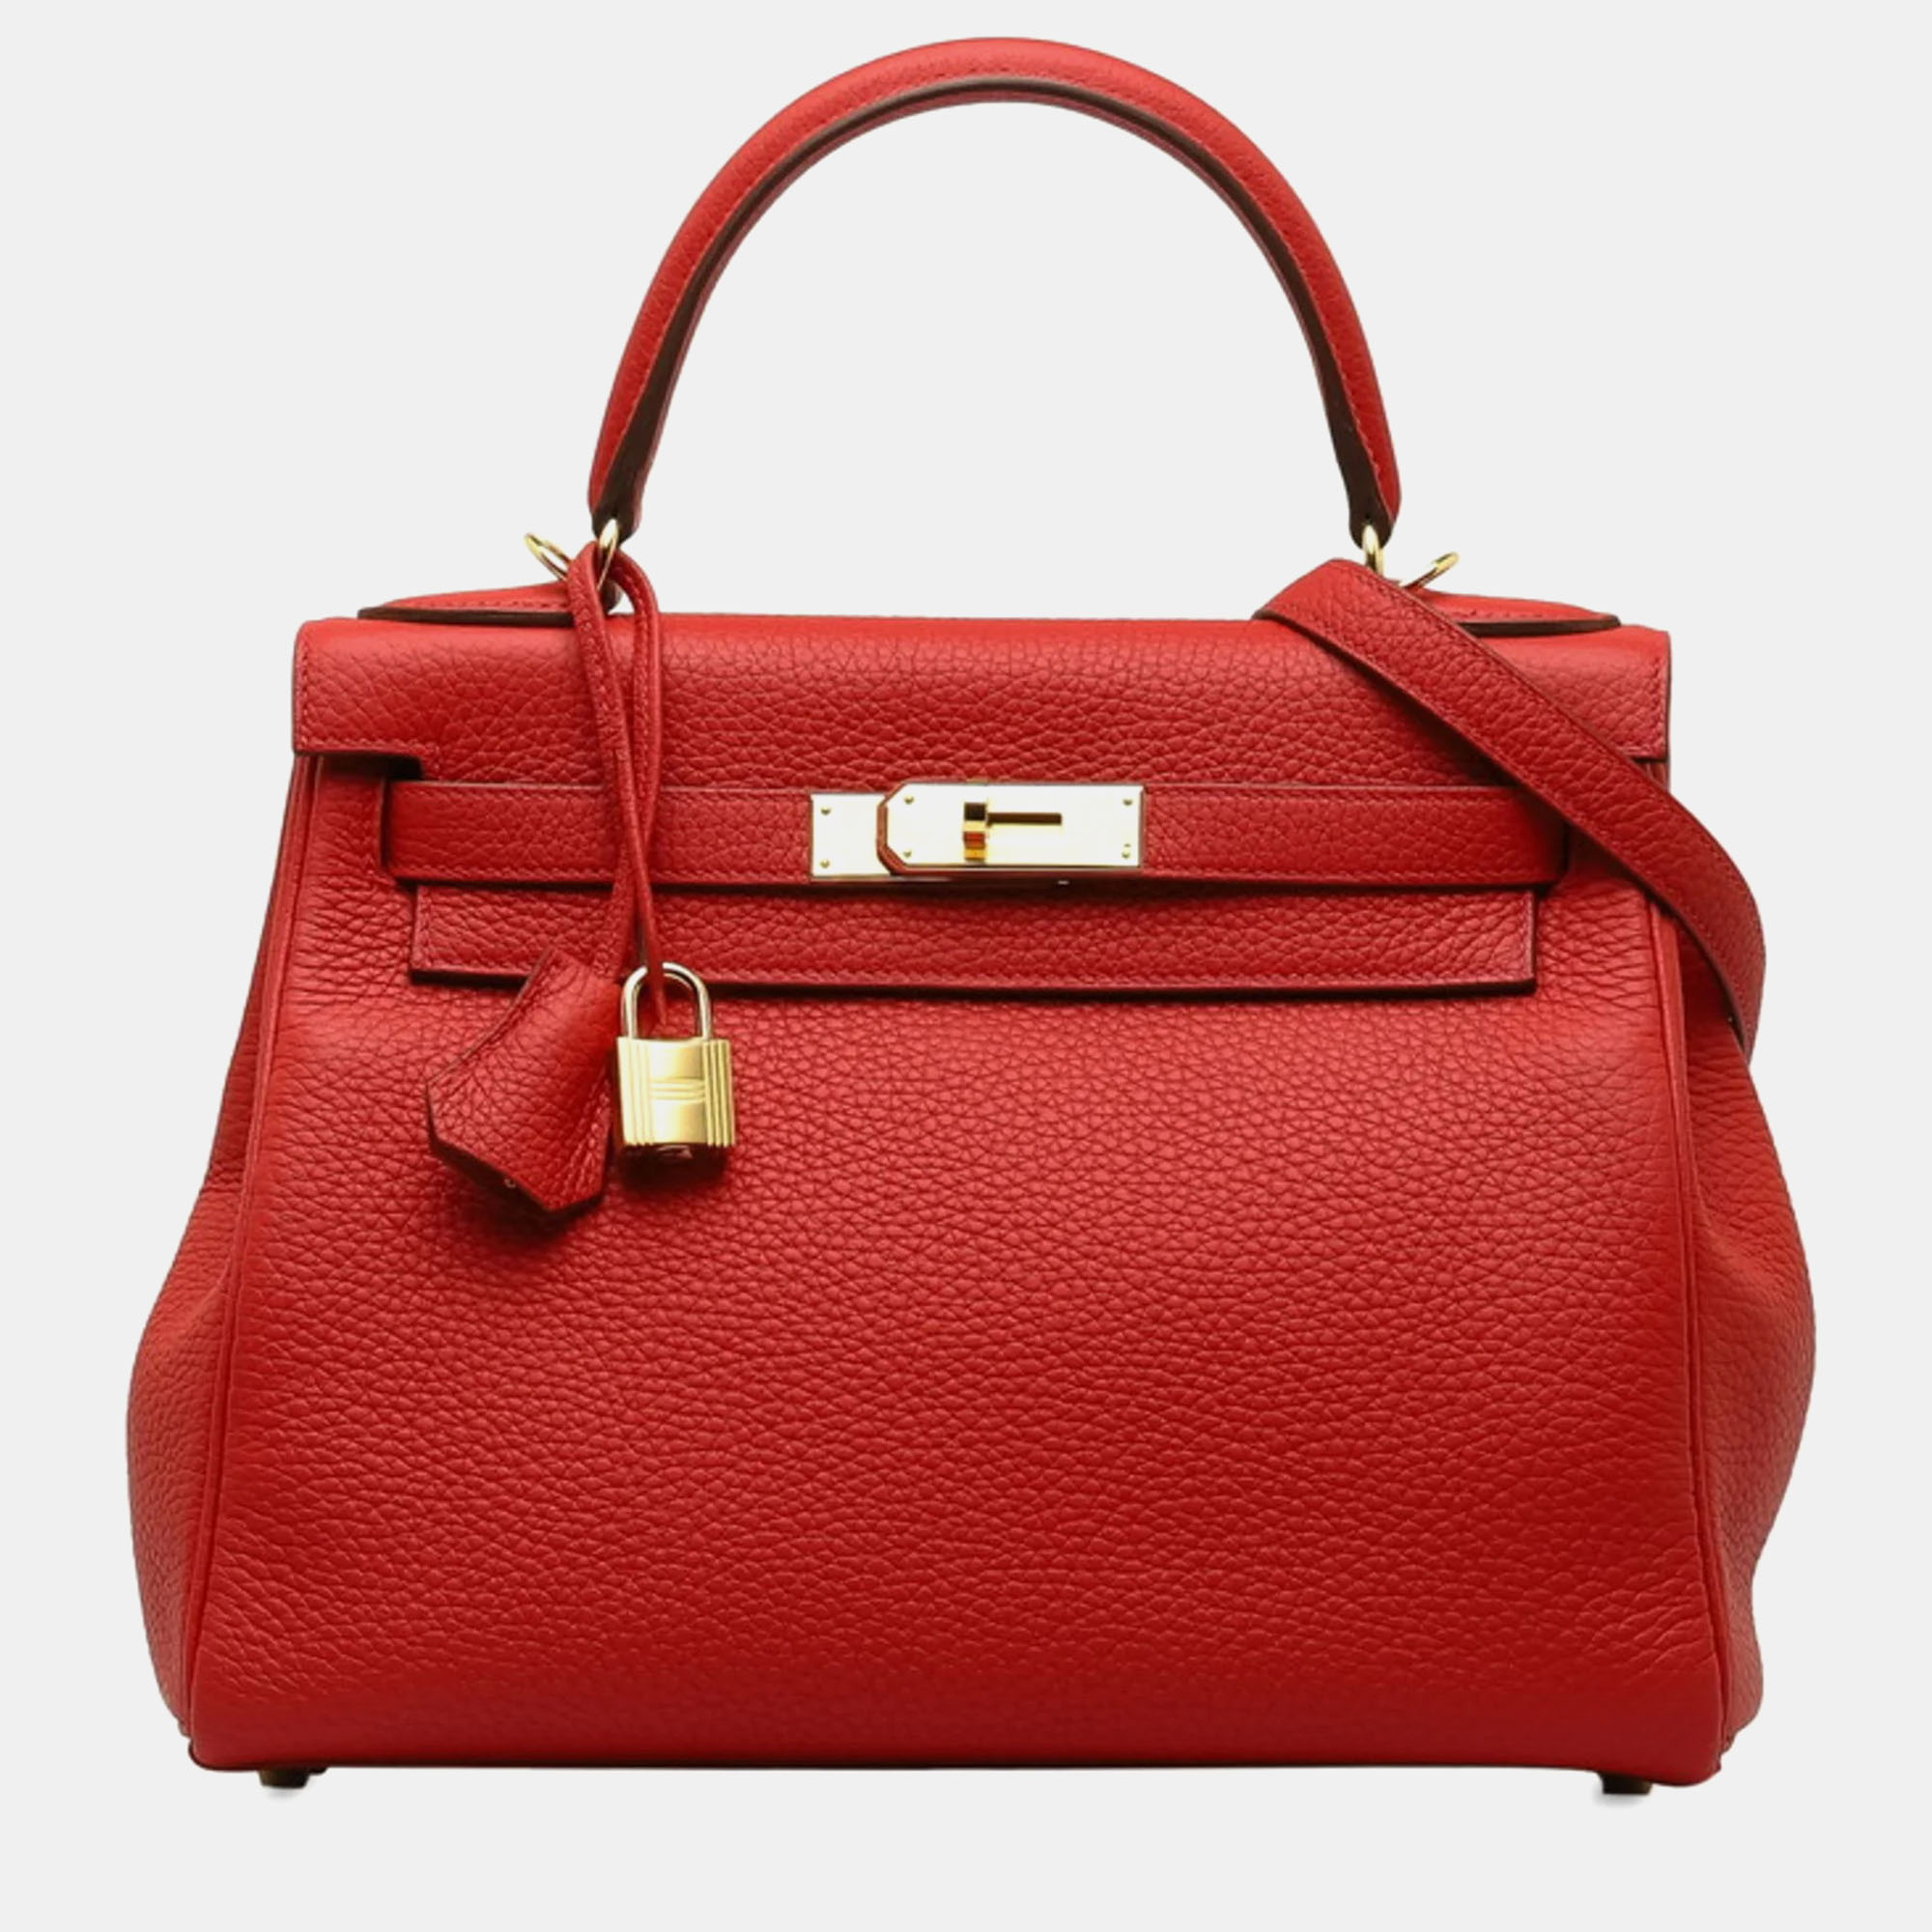 

Hermes Rose Texas Taurillon Clemence Leather Kelly 28 Tote Bag, Red